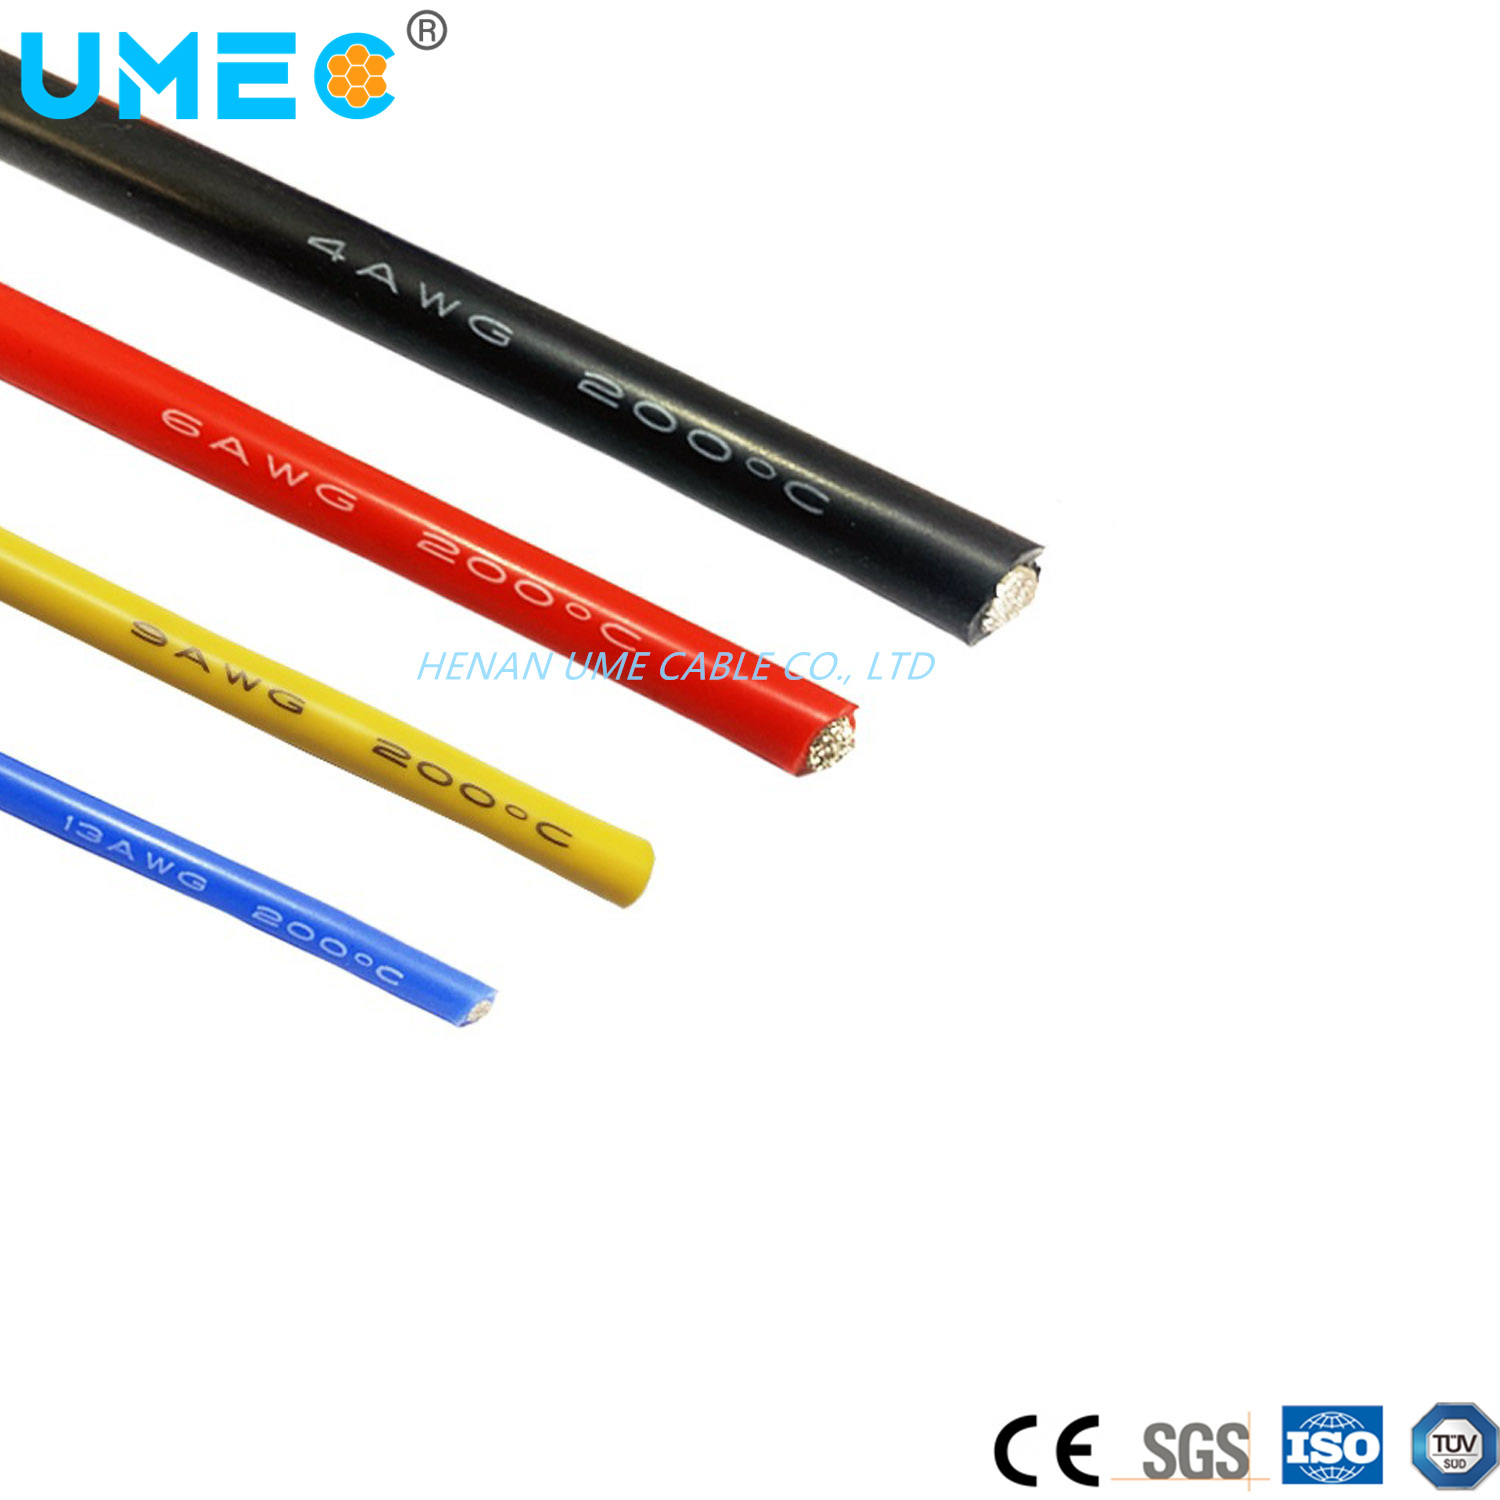 Electrical 300/500V Silicone Insulated Wire Sif Cable 1.5 2.5 4 6 10 16mm2 Electric Cable Wire